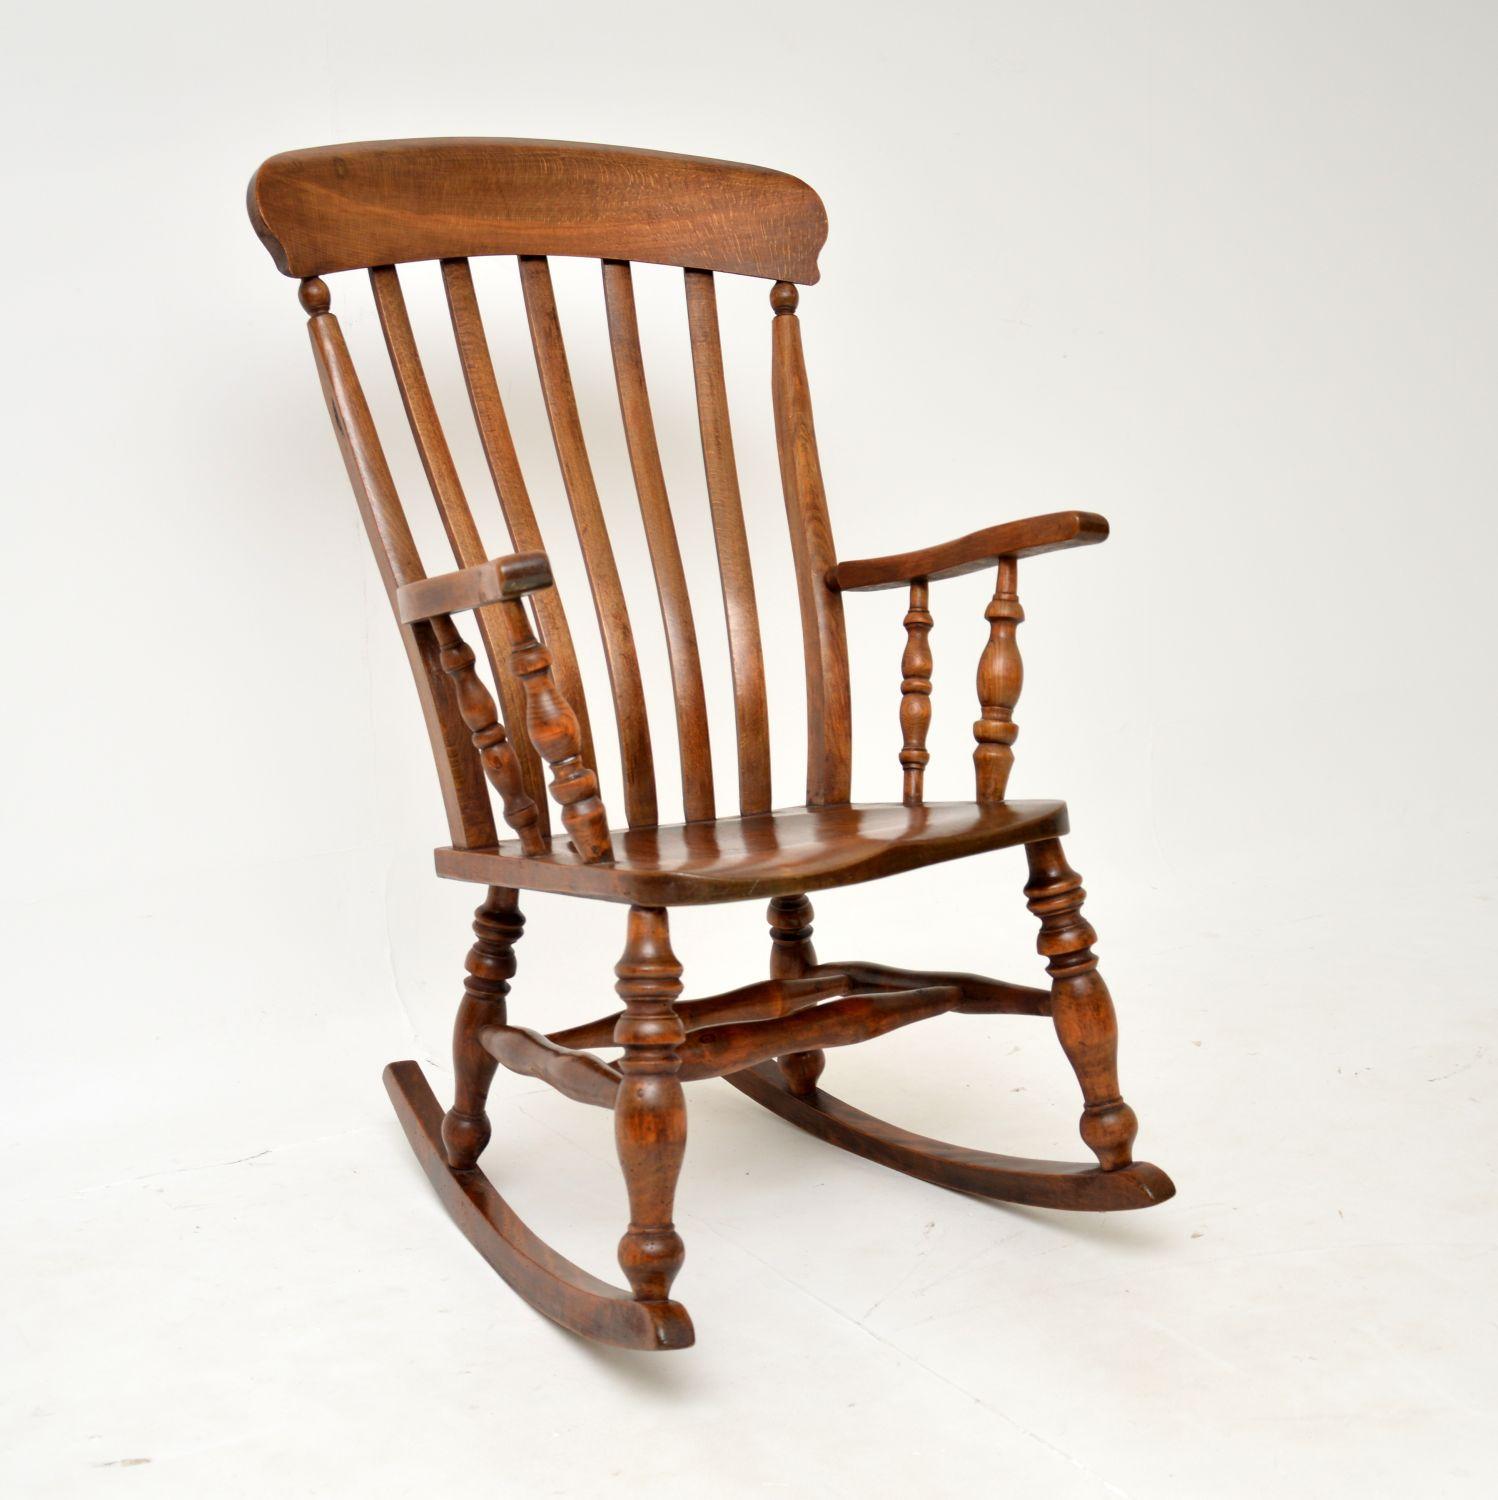 A beautifully made and very comfortable antique Victorian rocking chair. this was made in England, it dates from the 1860-1880’s.

This armchair is of great quality, with a generous seating area and smooth rocking motion. It has an elm, beech &